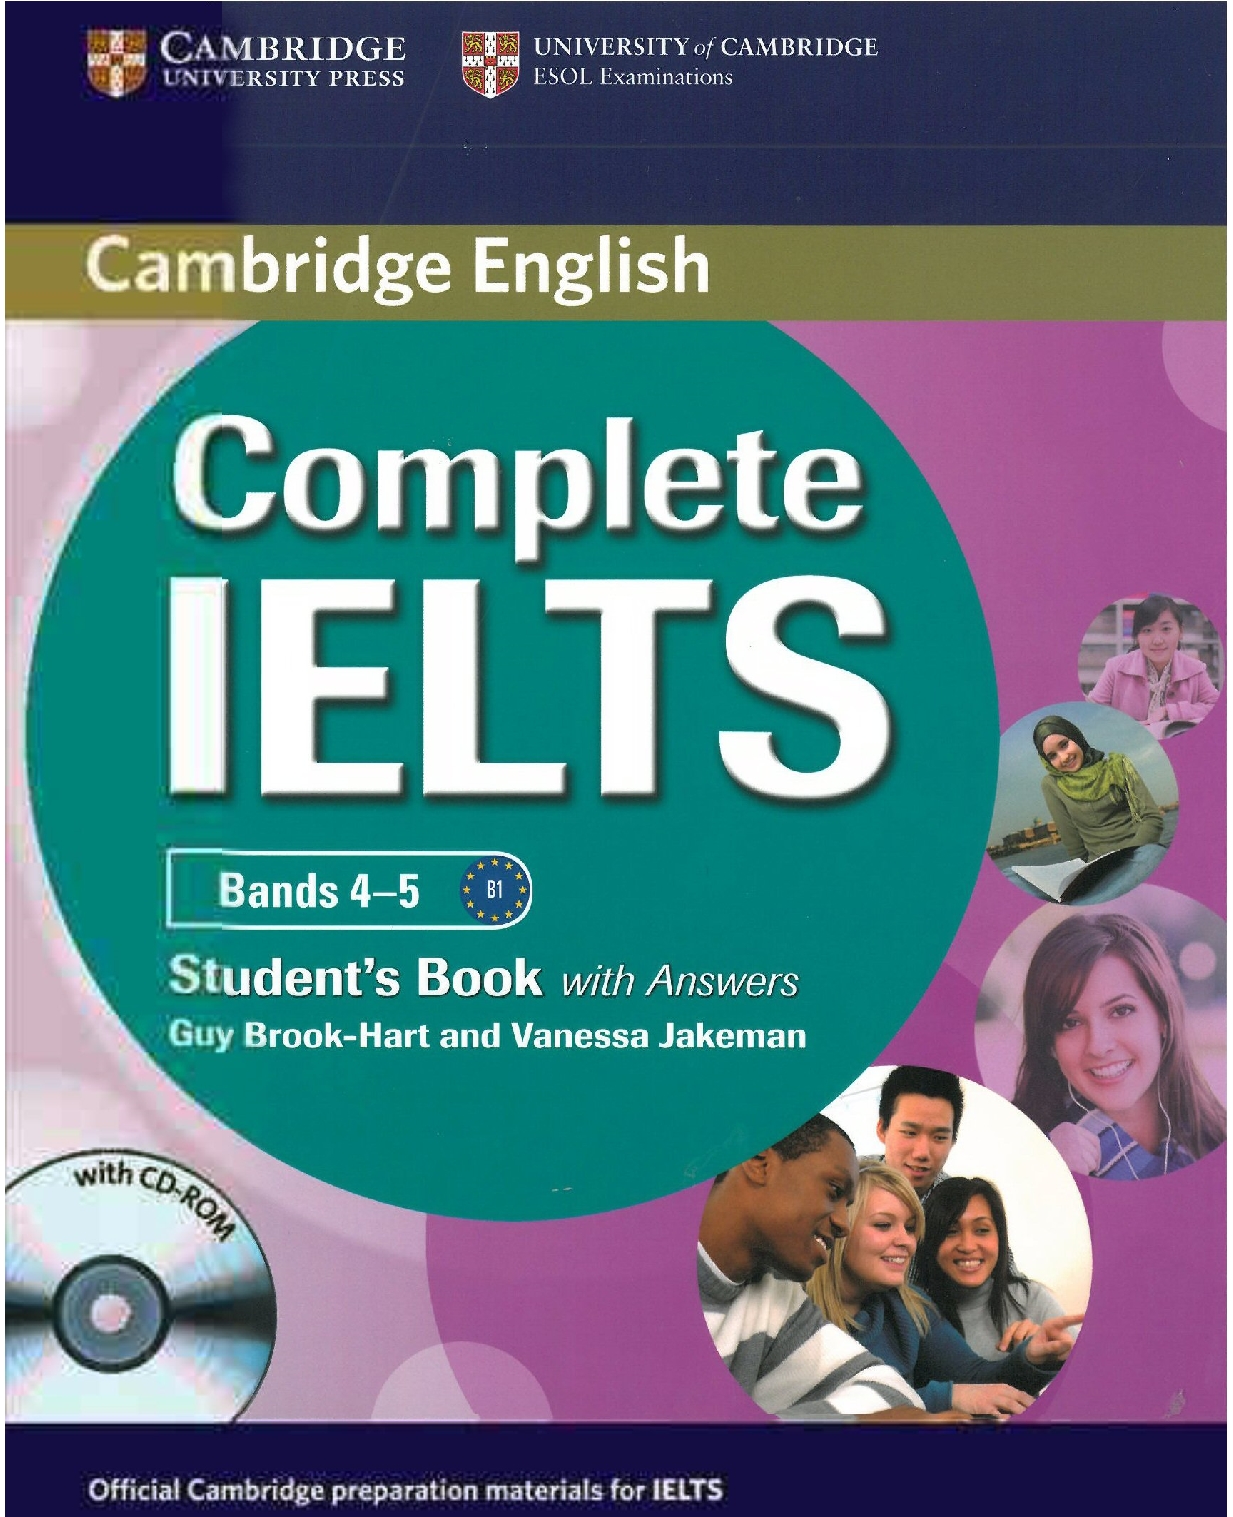 Complete IELTS Band 4-5